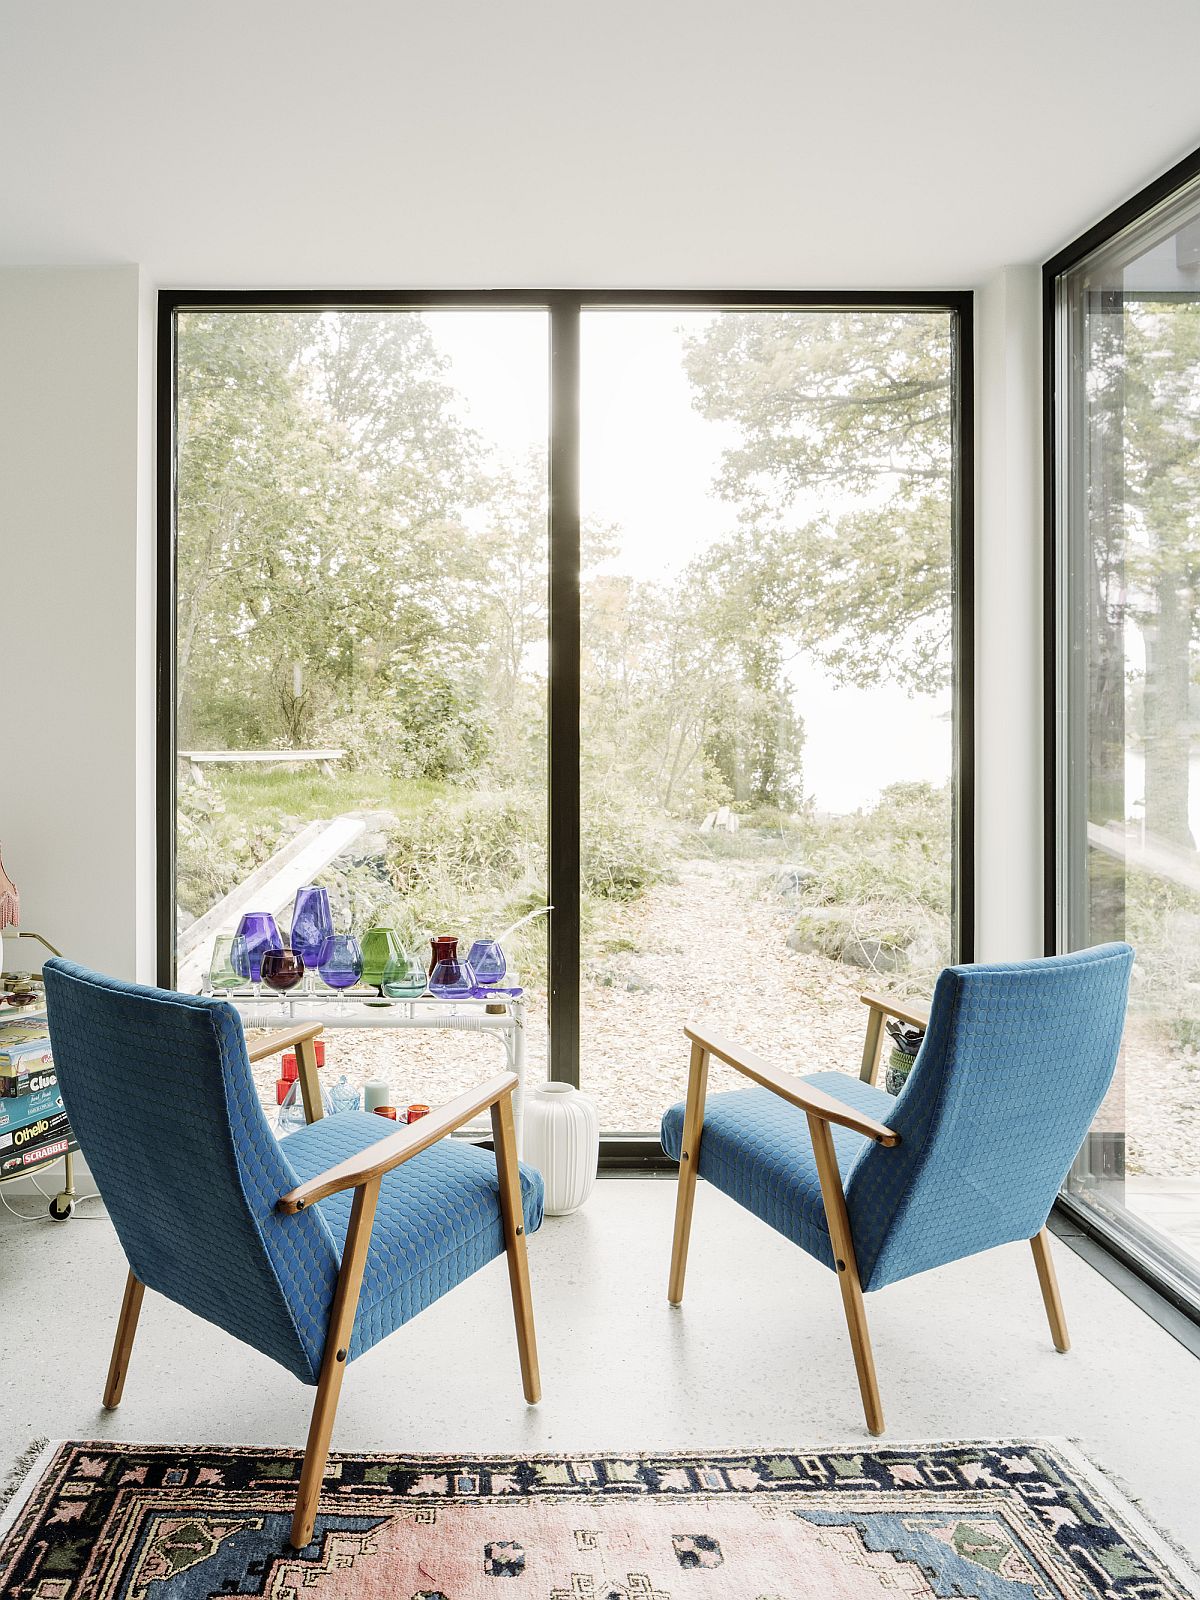 Lovely-little-conversation-nook-with-large-glass-walls-and-bright-blue-chairs